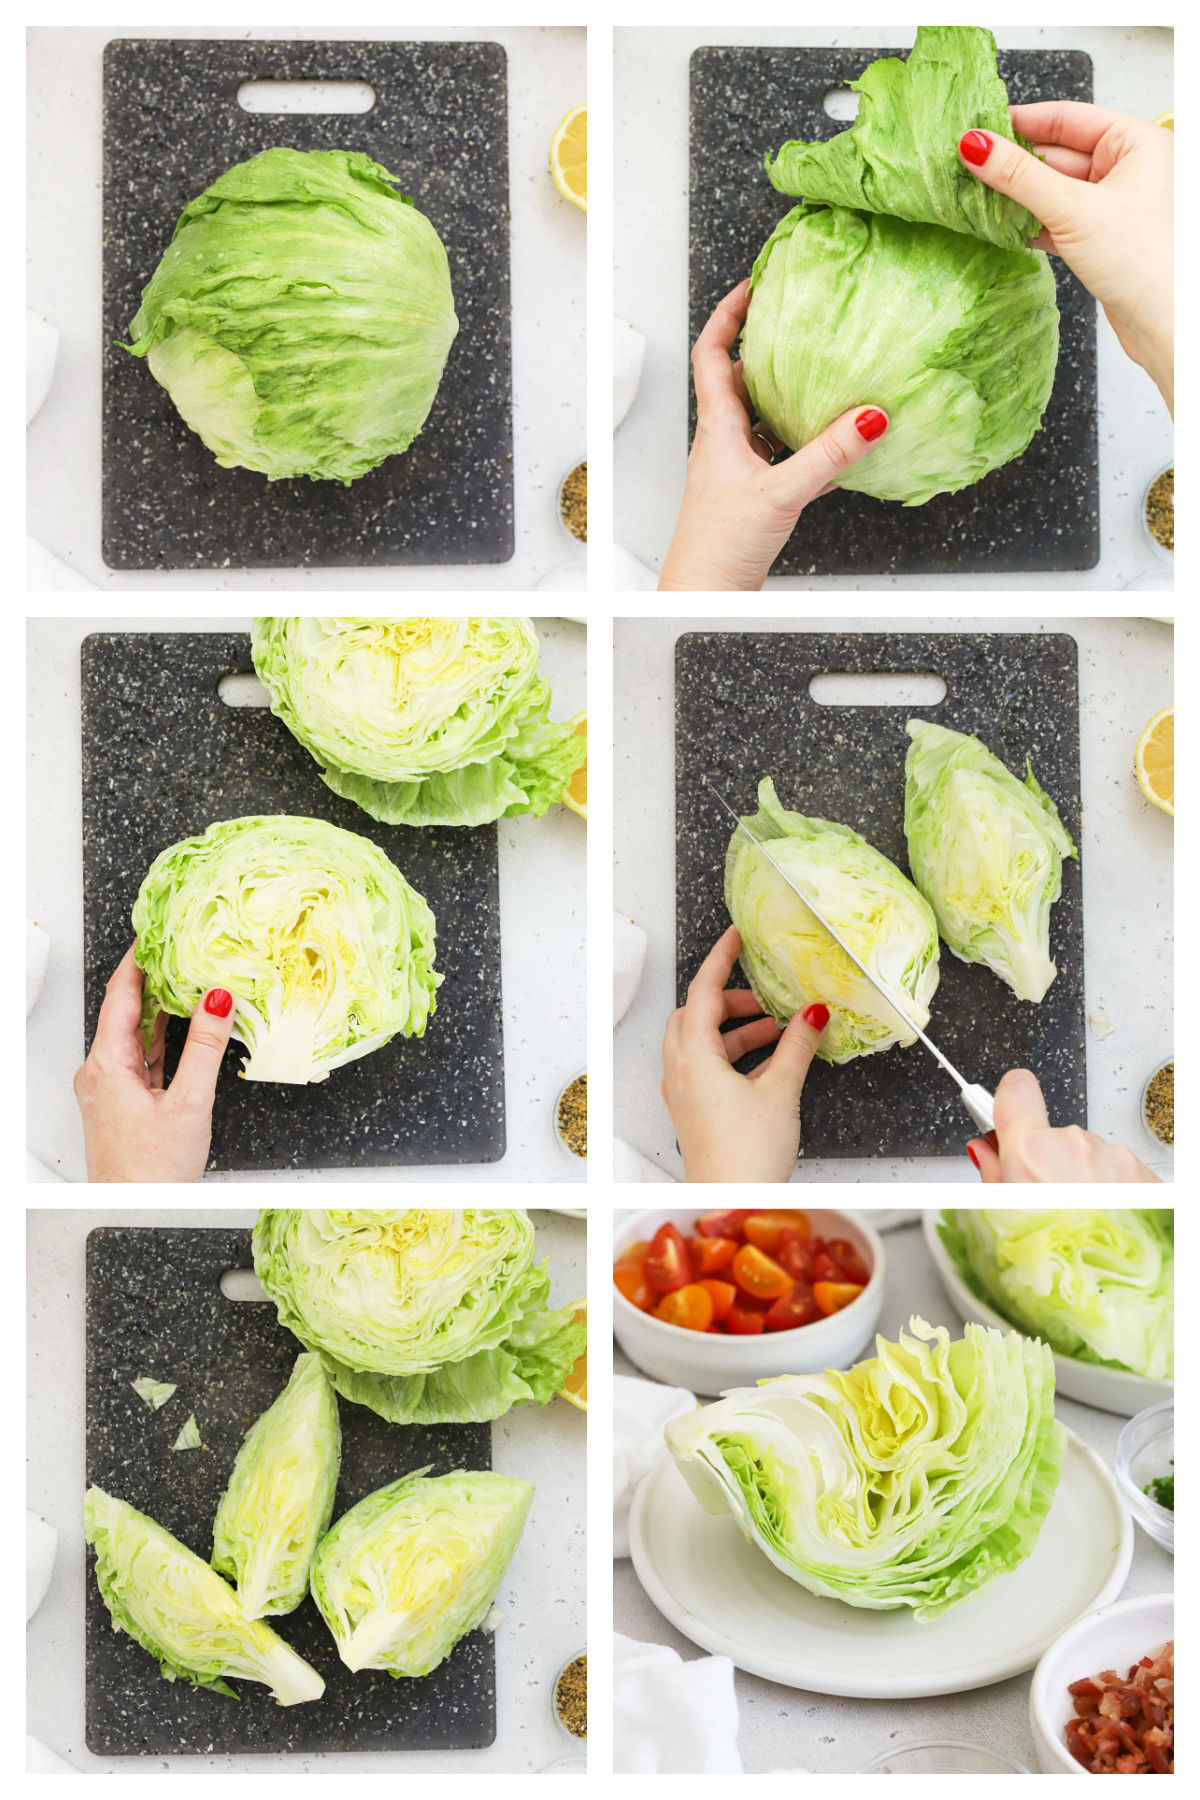 cutting lettuce into lettuce wedges for wedge salad, step by step